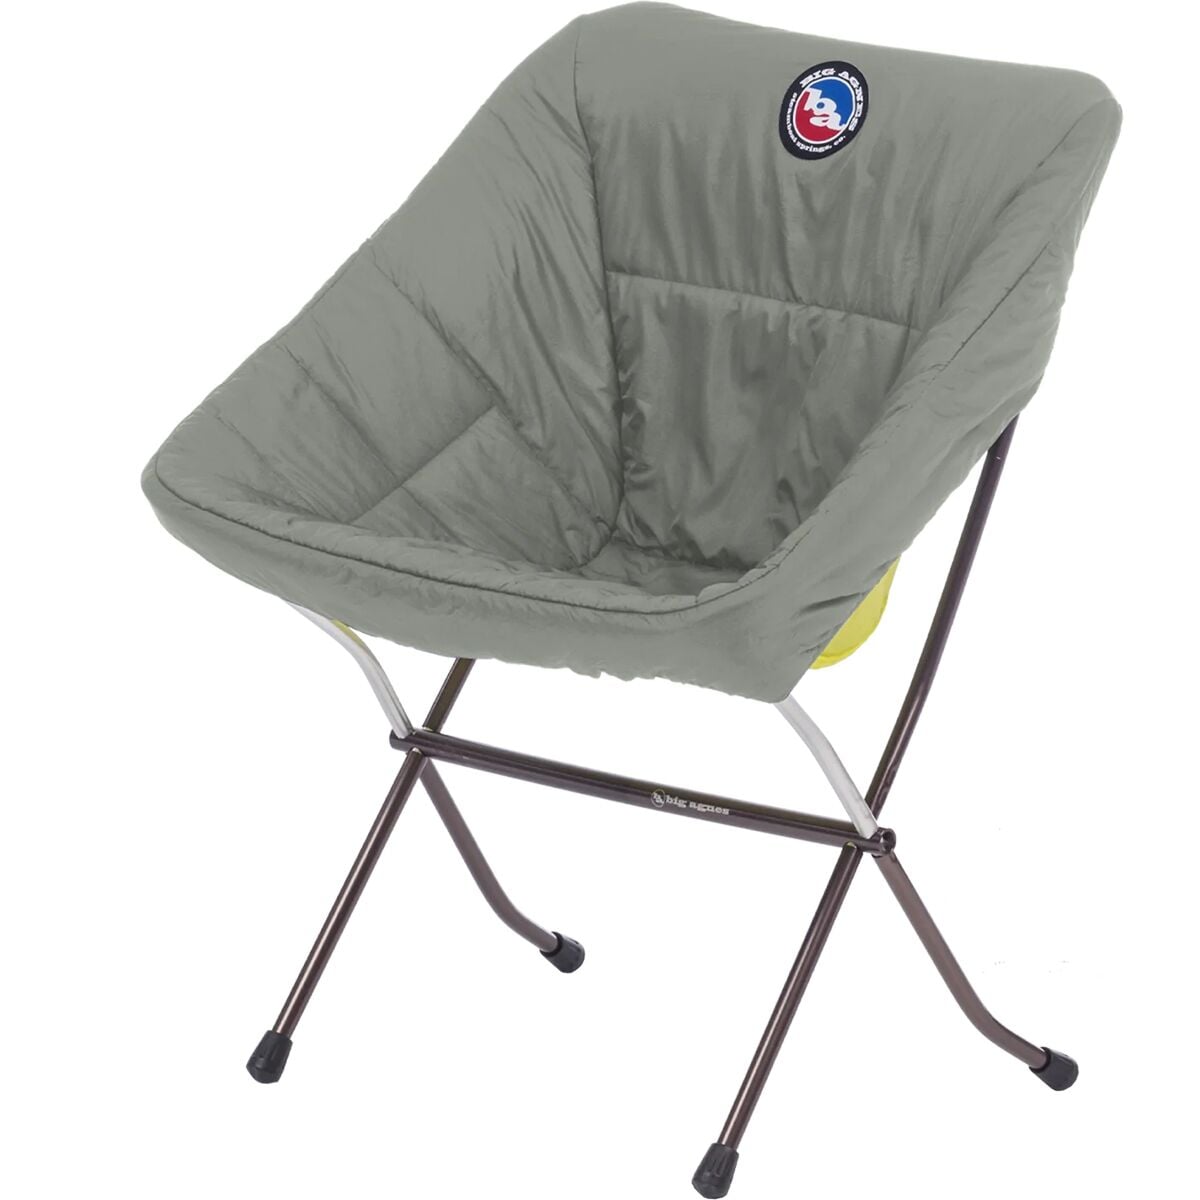 Photos - Outdoor Furniture Big Agnes Insulated Camp Chair Cover - Mica Basin Camp Chair 